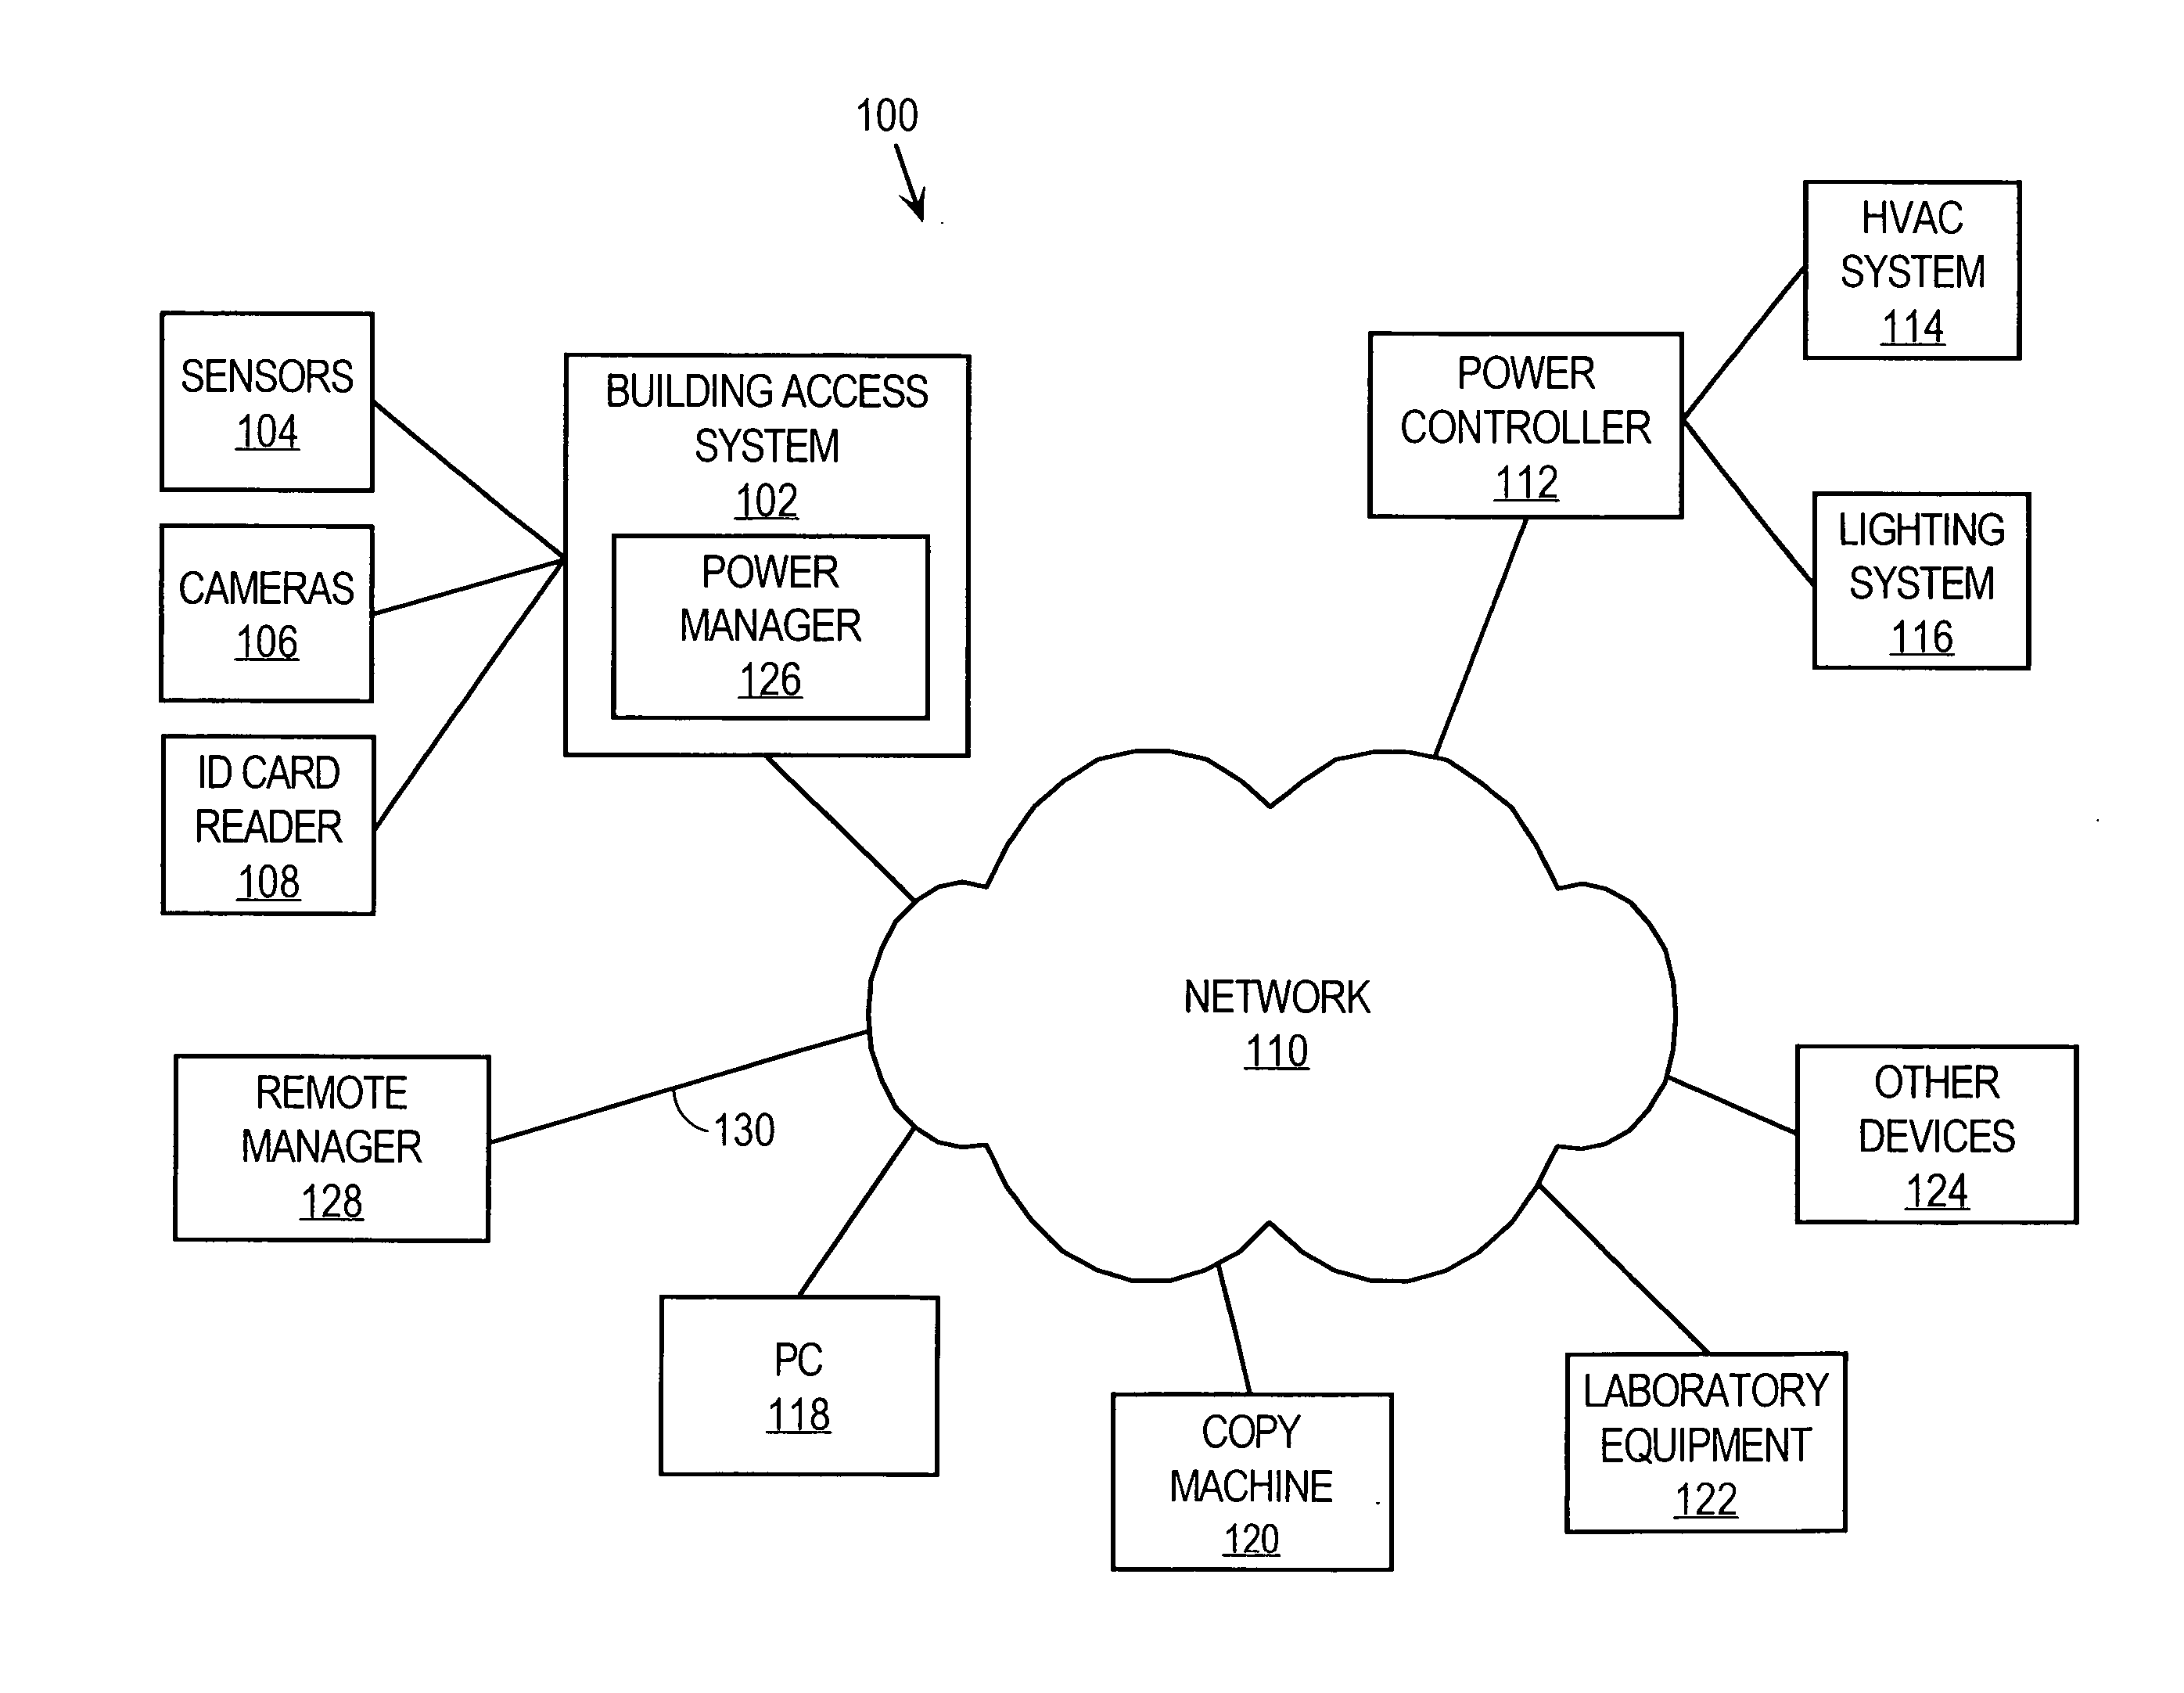 Pre-activation of network devices